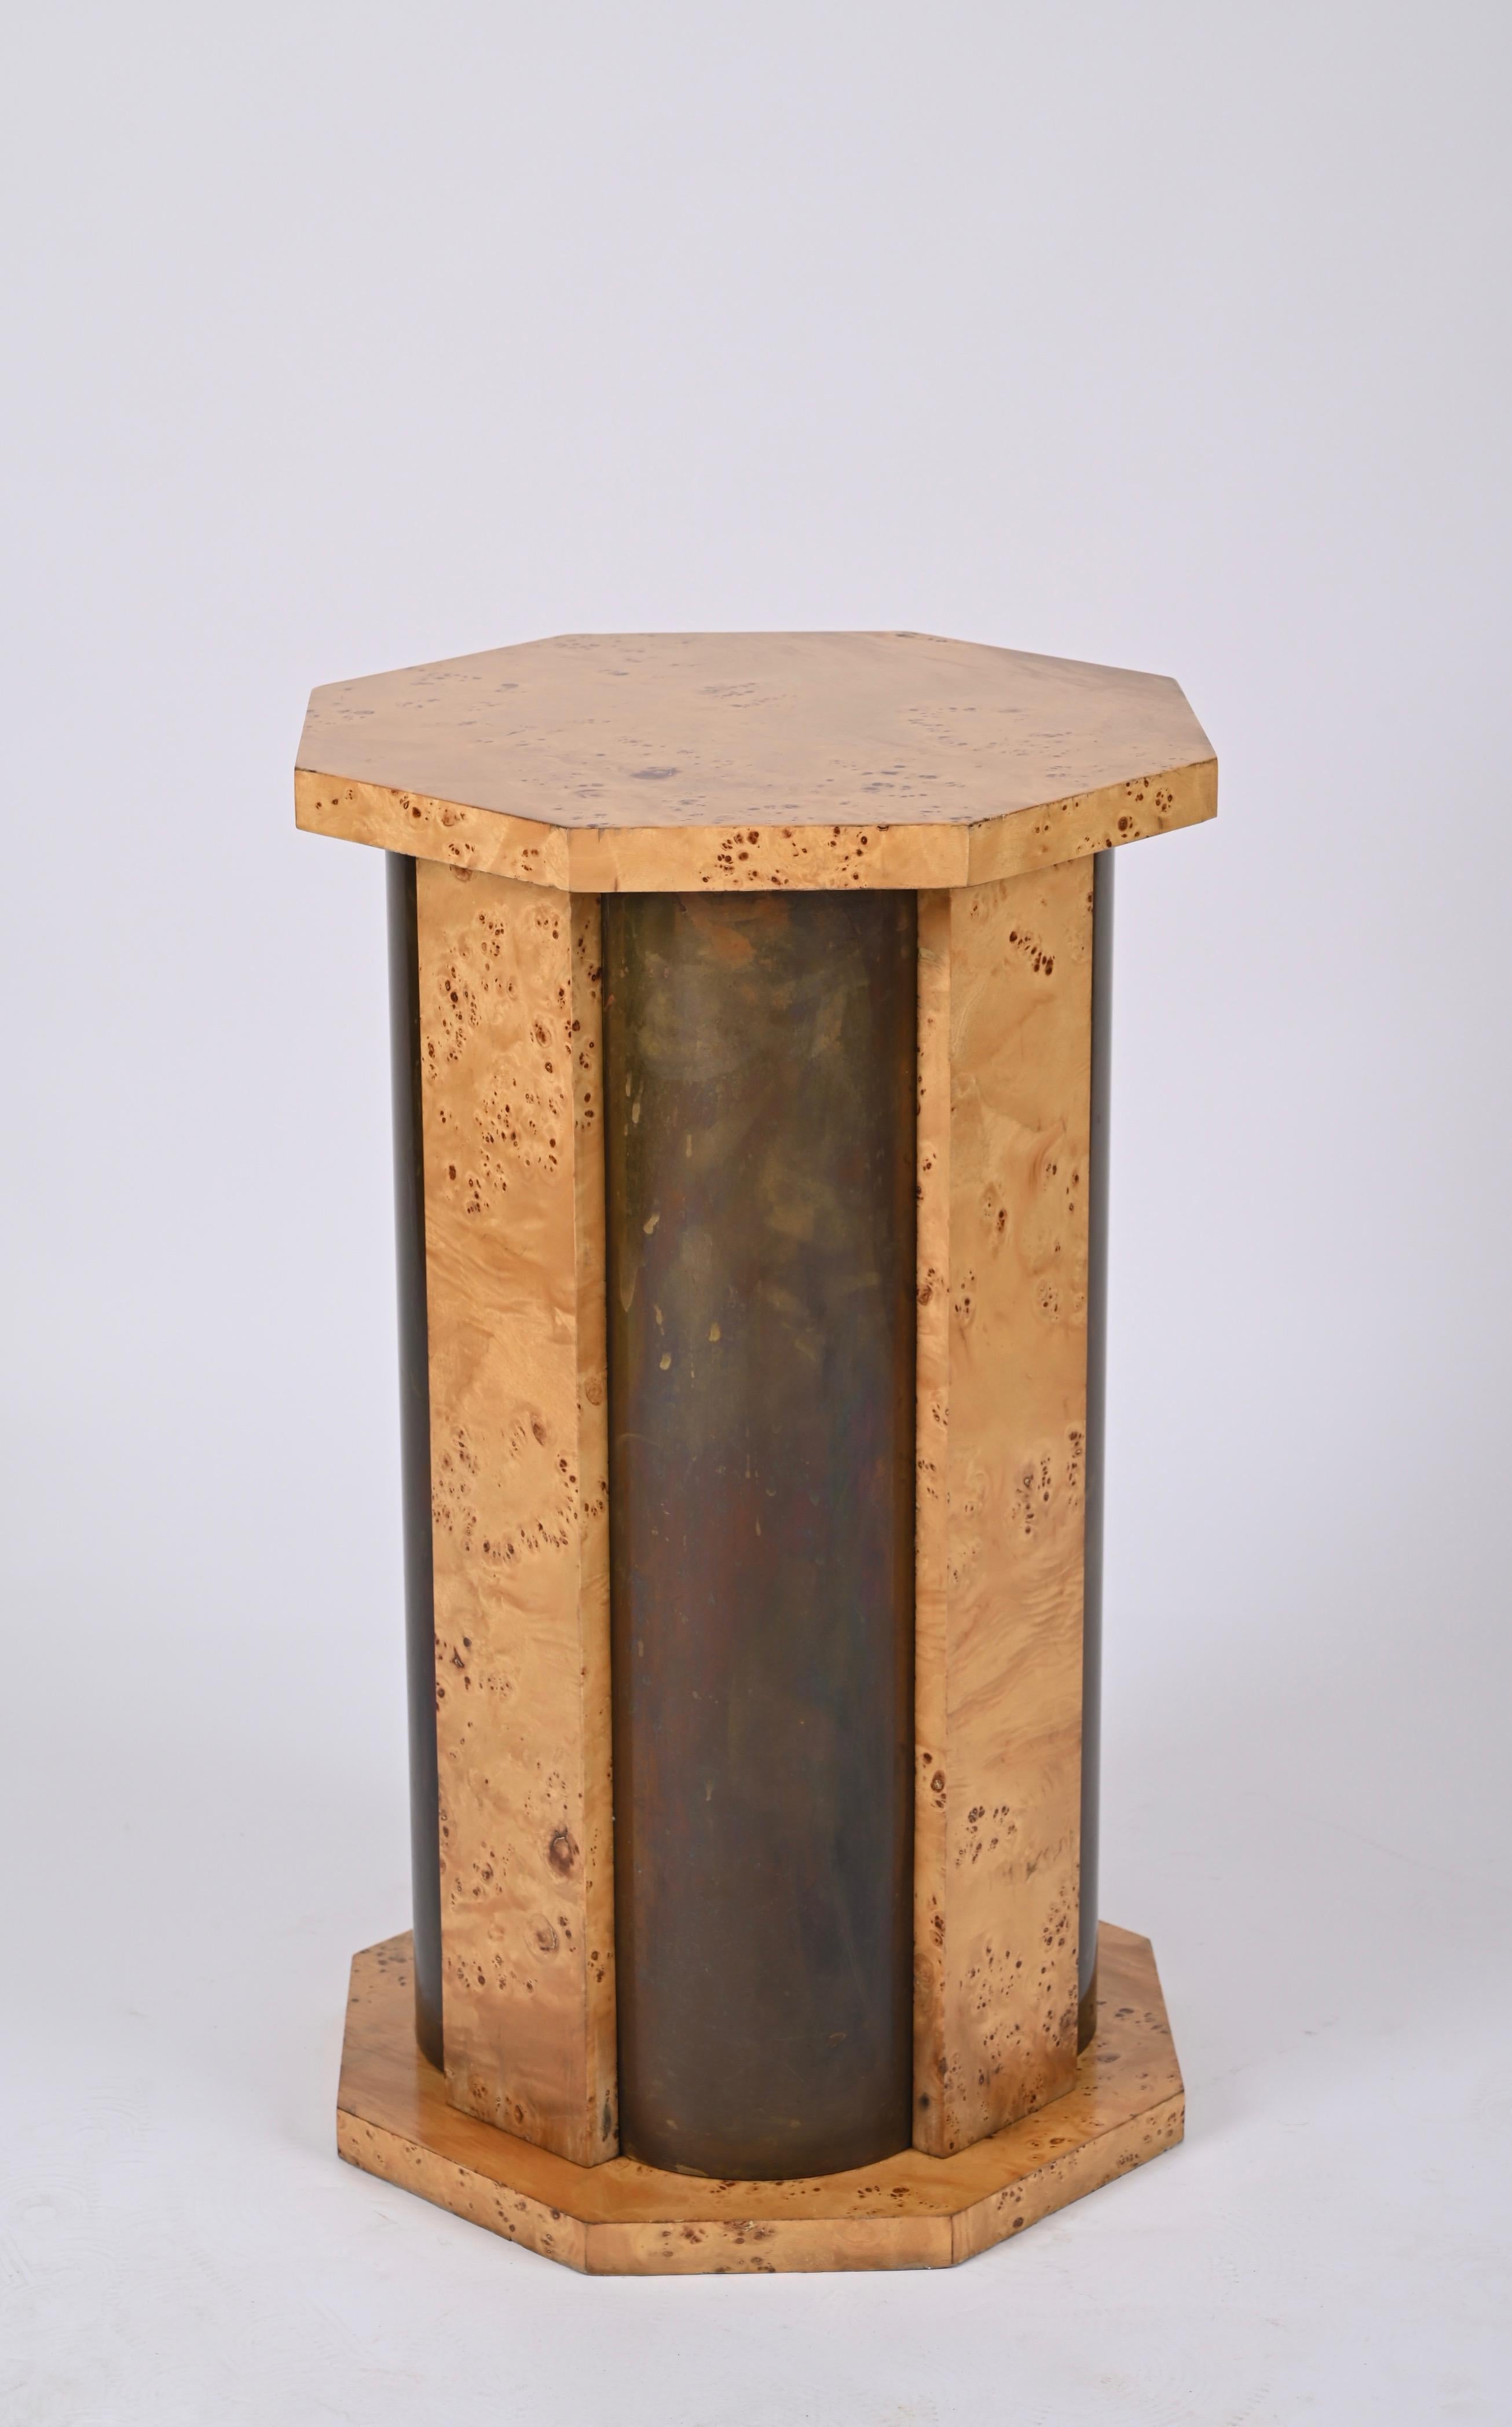 Tommaso Barbi Octagonal Table Pedestal in Burl Wood and Brass, Italy, 1970 For Sale 11